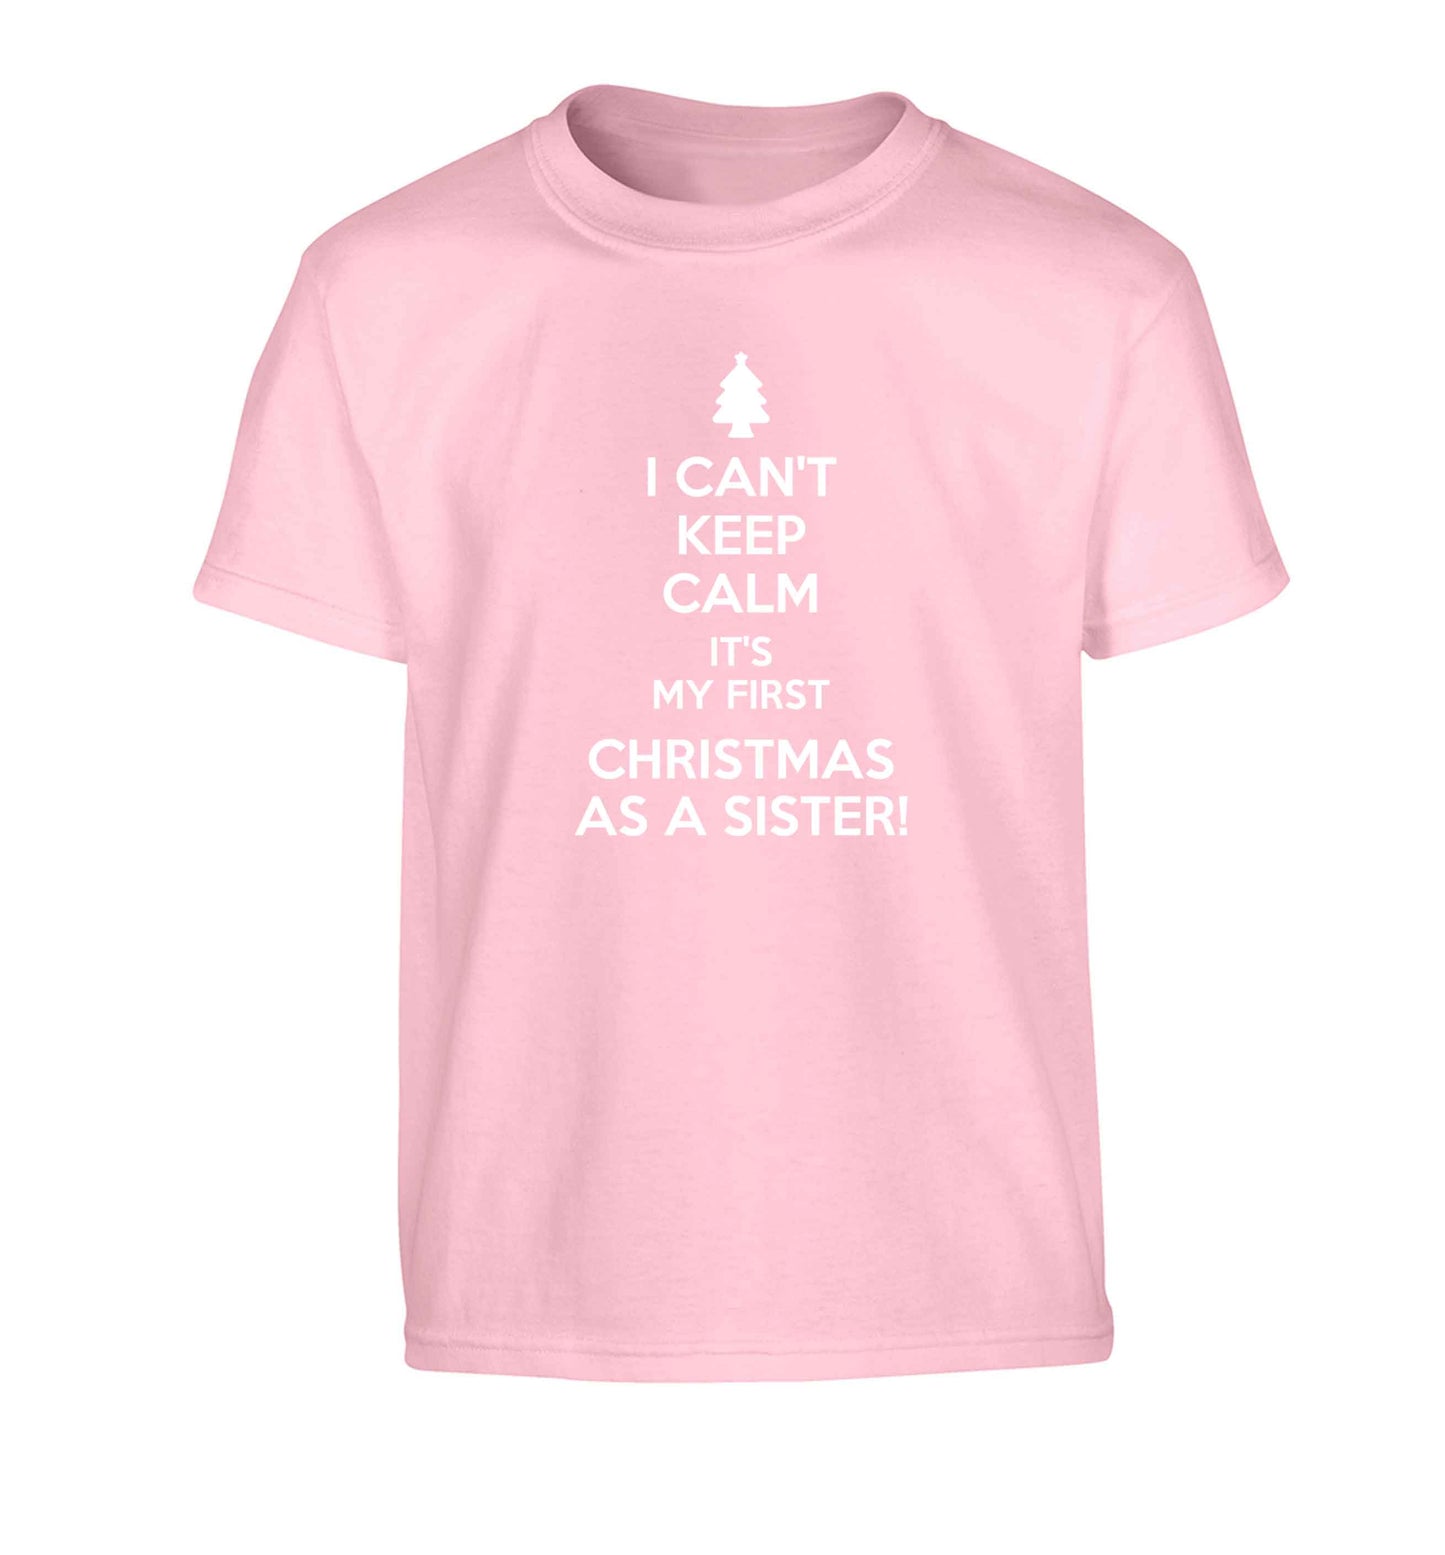 I can't keep calm it's my first Christmas as a sister! Children's light pink Tshirt 12-13 Years